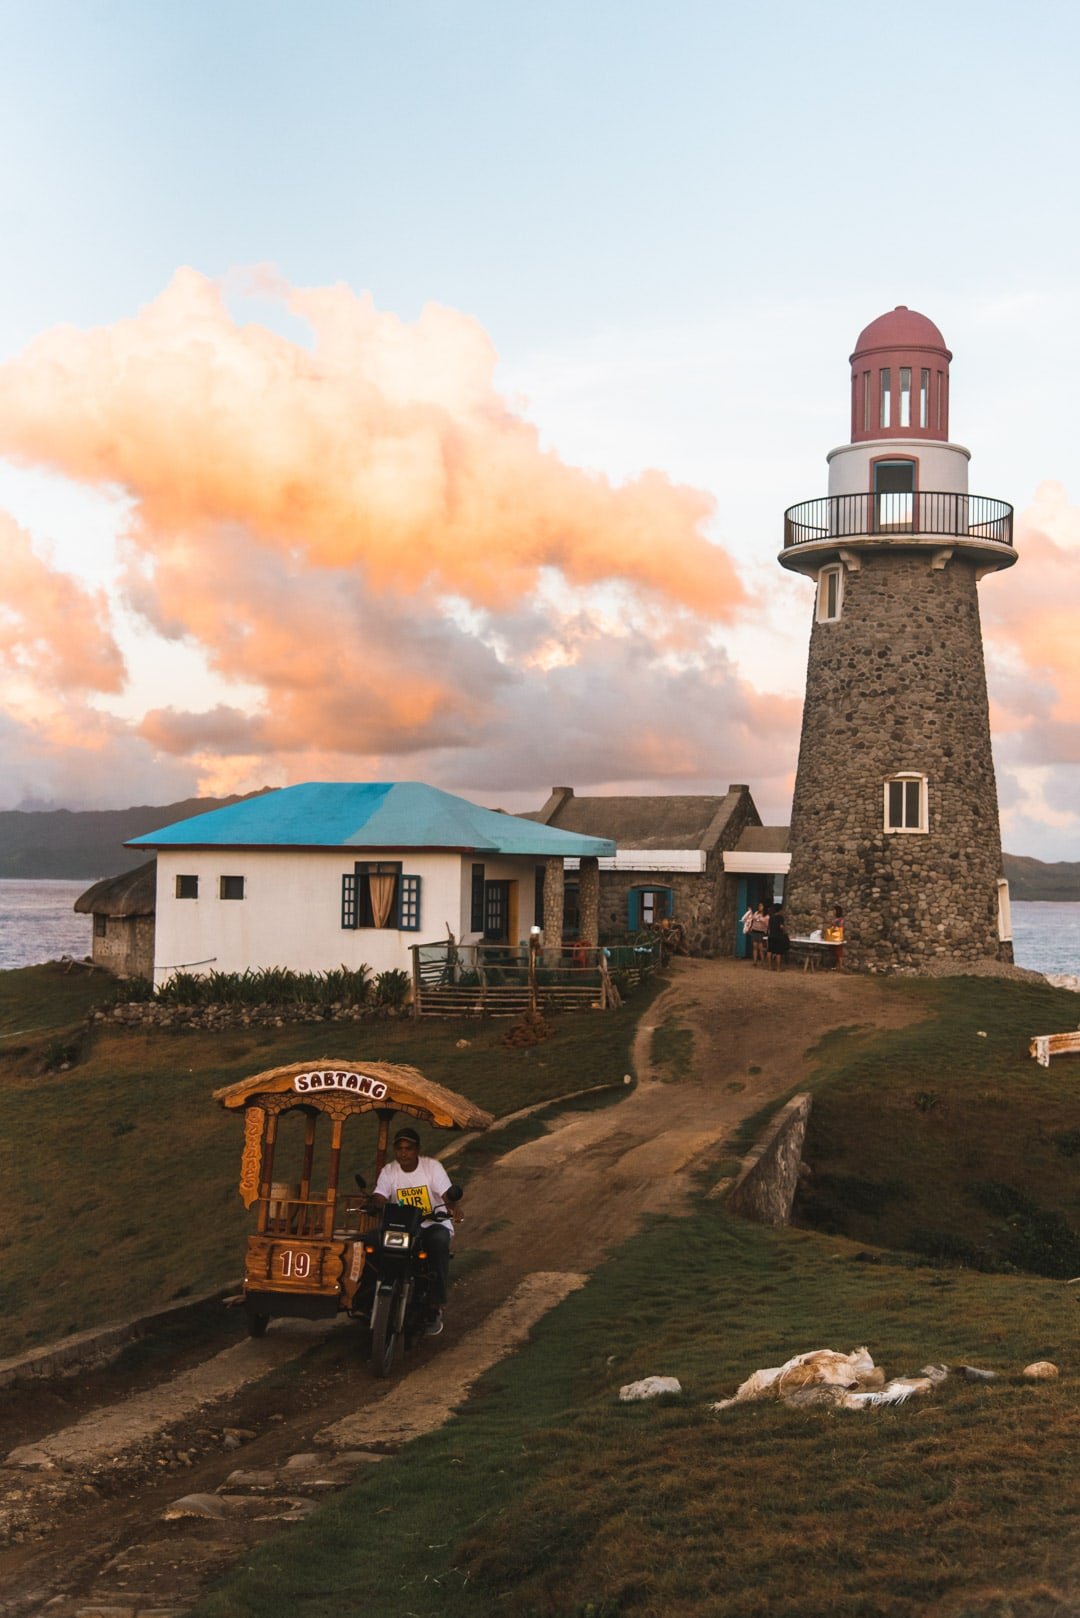 Transportation around Batanes, Batanes tourist spots, atms in batanes, wifi connection in batanes, how to go to Batanes, Sabtang lighthouse